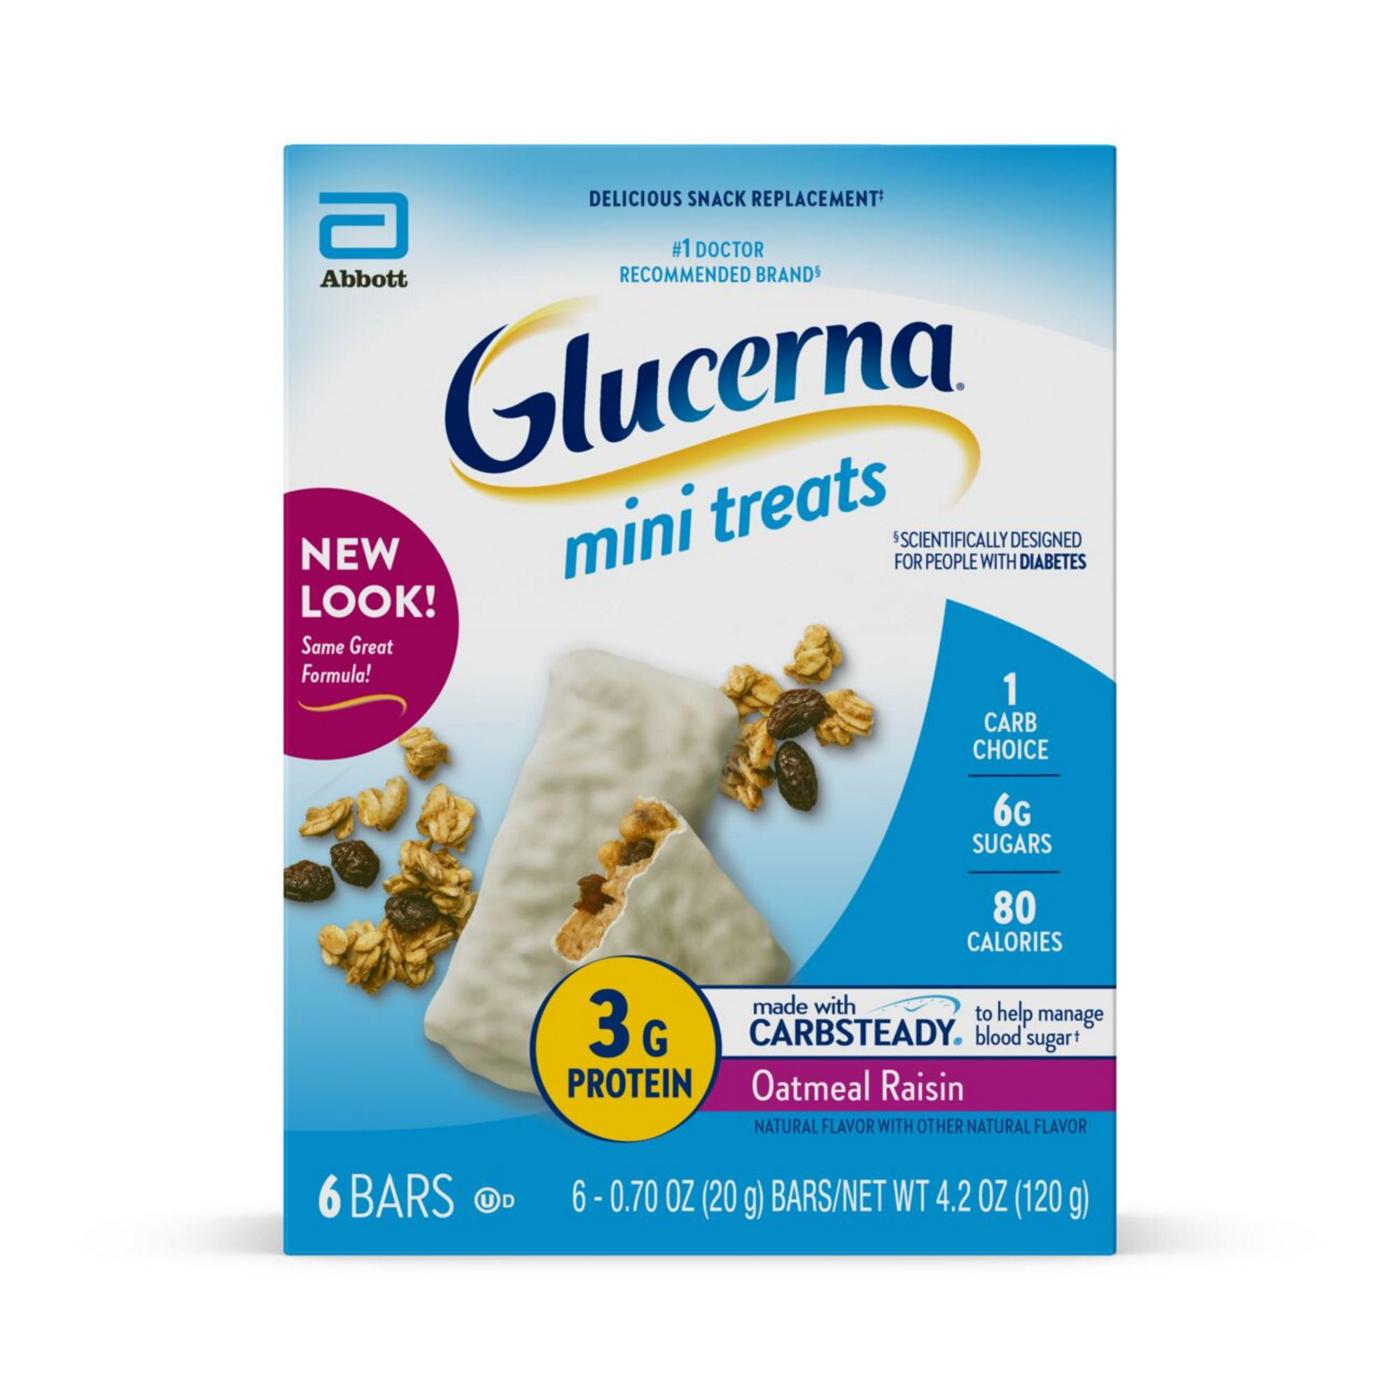 Glucerna Mini Treats, Diabetic Snack Replacement to Support Blood Sugar Management, Oatmeal Raisin; image 1 of 9